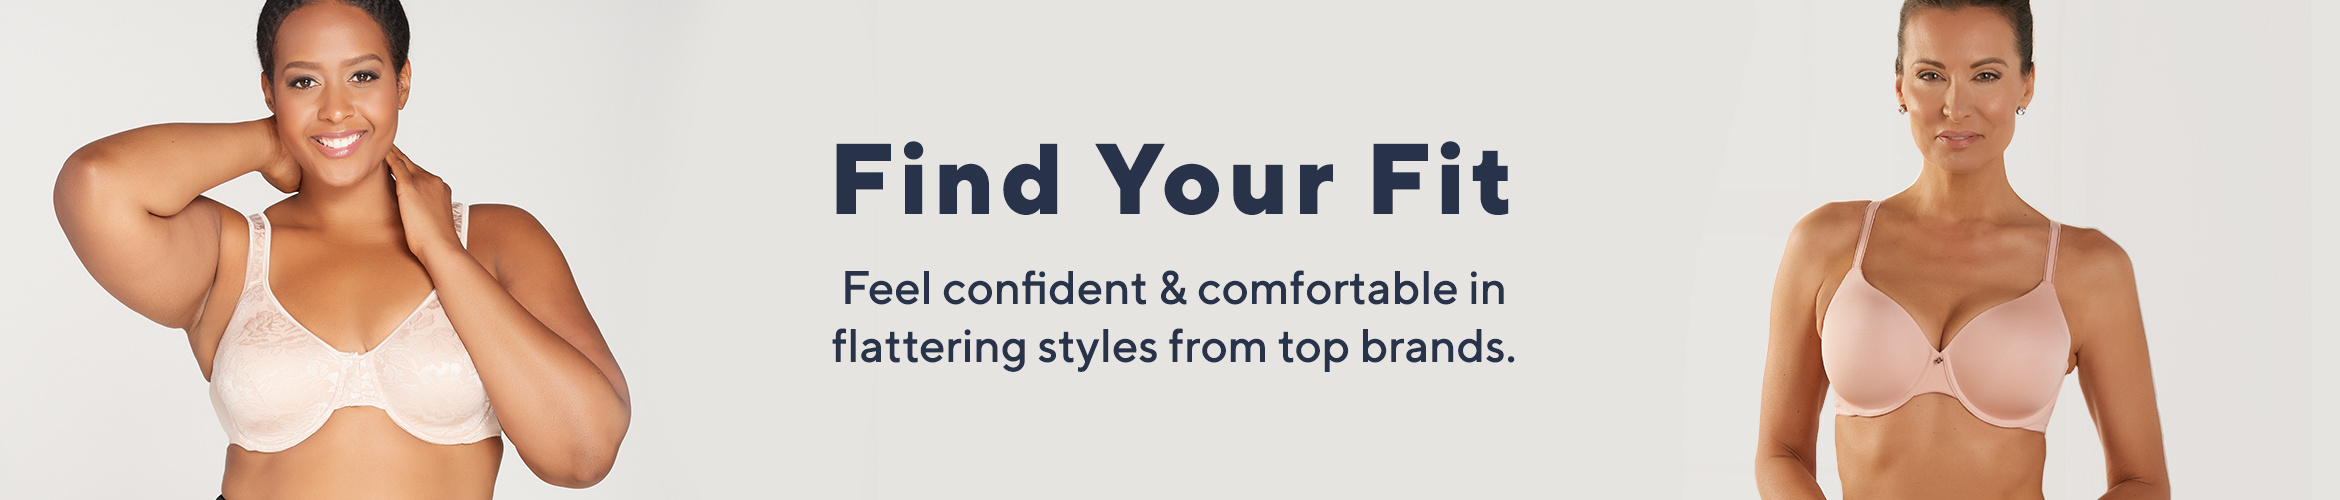 Find Your Fit  Feel confident & comfortable in flattering styles from top brands.